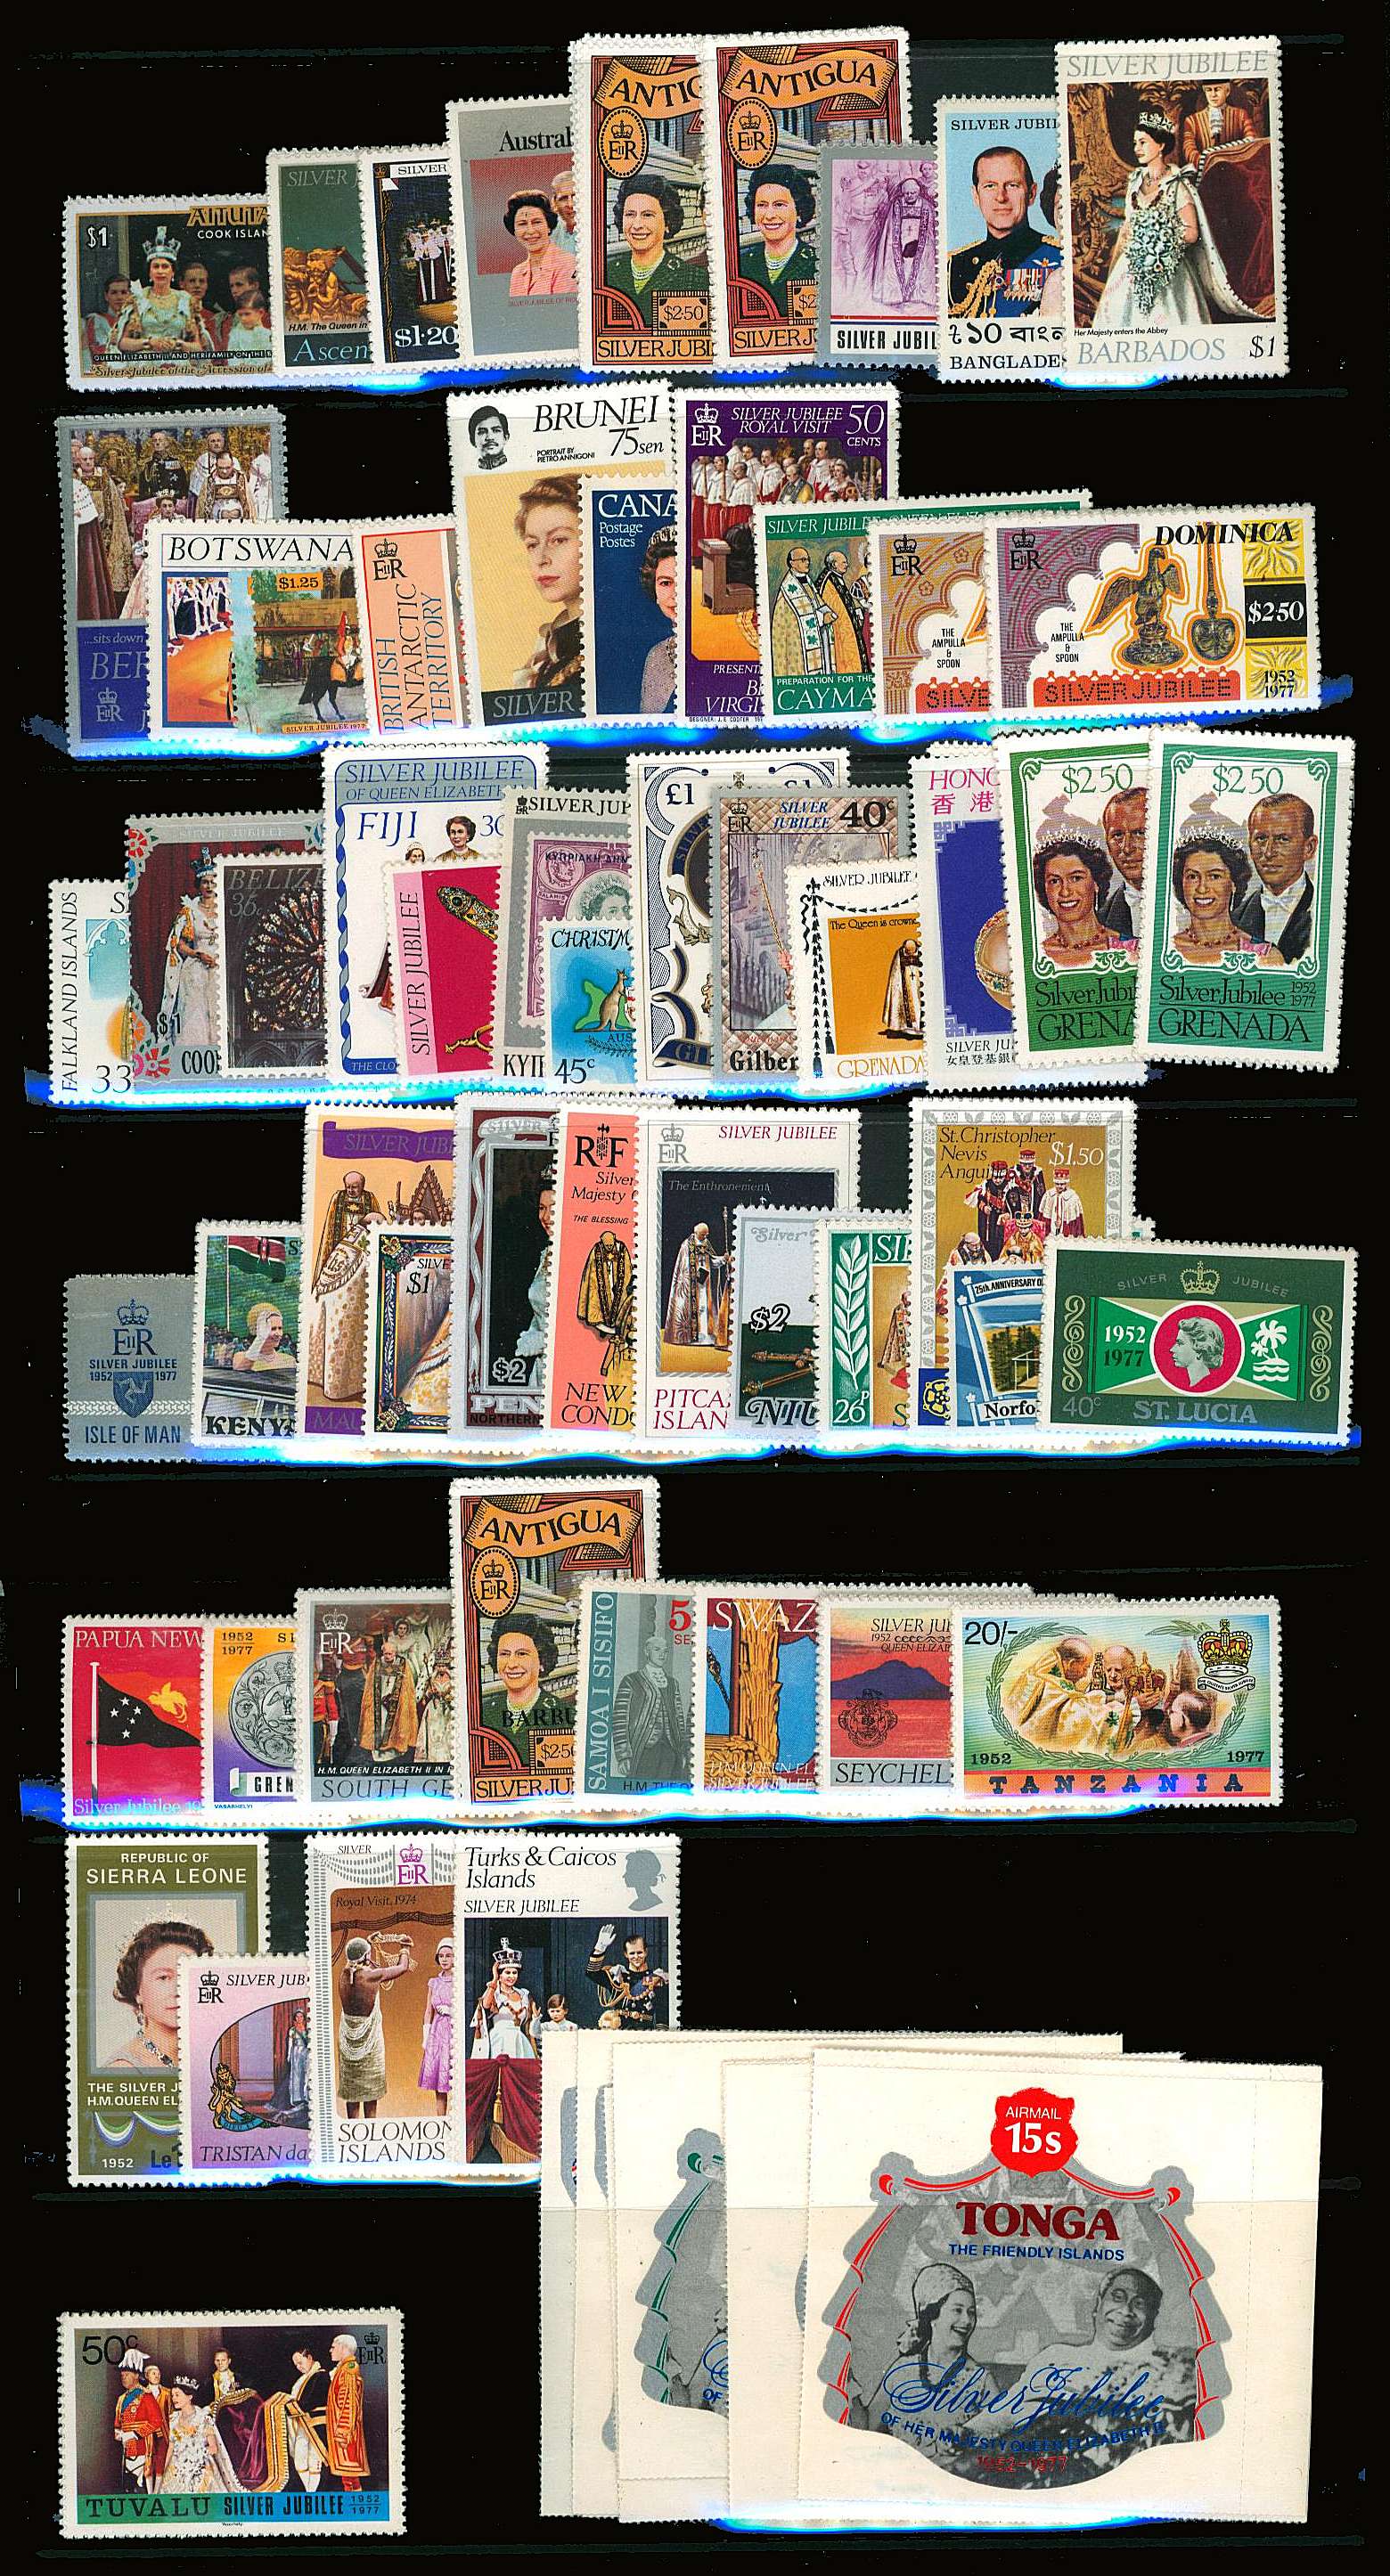 Silver Jubilee run of fifty-seven sets - 203 stamps.<br/>Please note that the definition as to what goes into this Omnibus run varies. <br/>This run was extracted from a printed album as was complete as defined in the album.